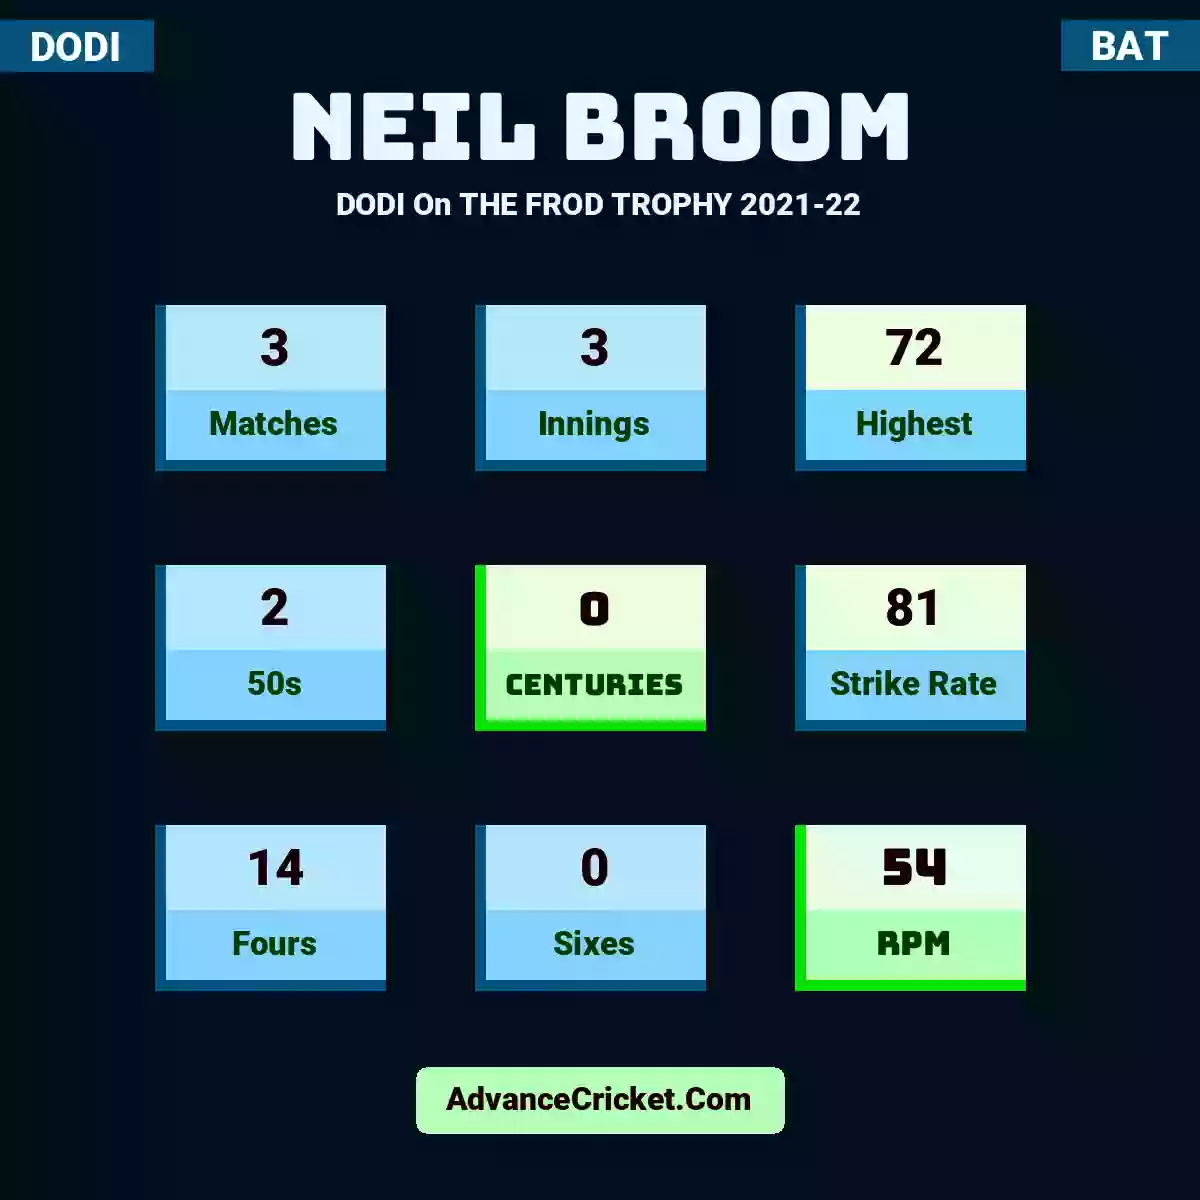 Neil Broom DODI  On THE FROD TROPHY 2021-22, Neil Broom played 3 matches, scored 72 runs as highest, 2 half-centuries, and 0 centuries, with a strike rate of 81. N.Broom hit 14 fours and 0 sixes, with an RPM of 54.